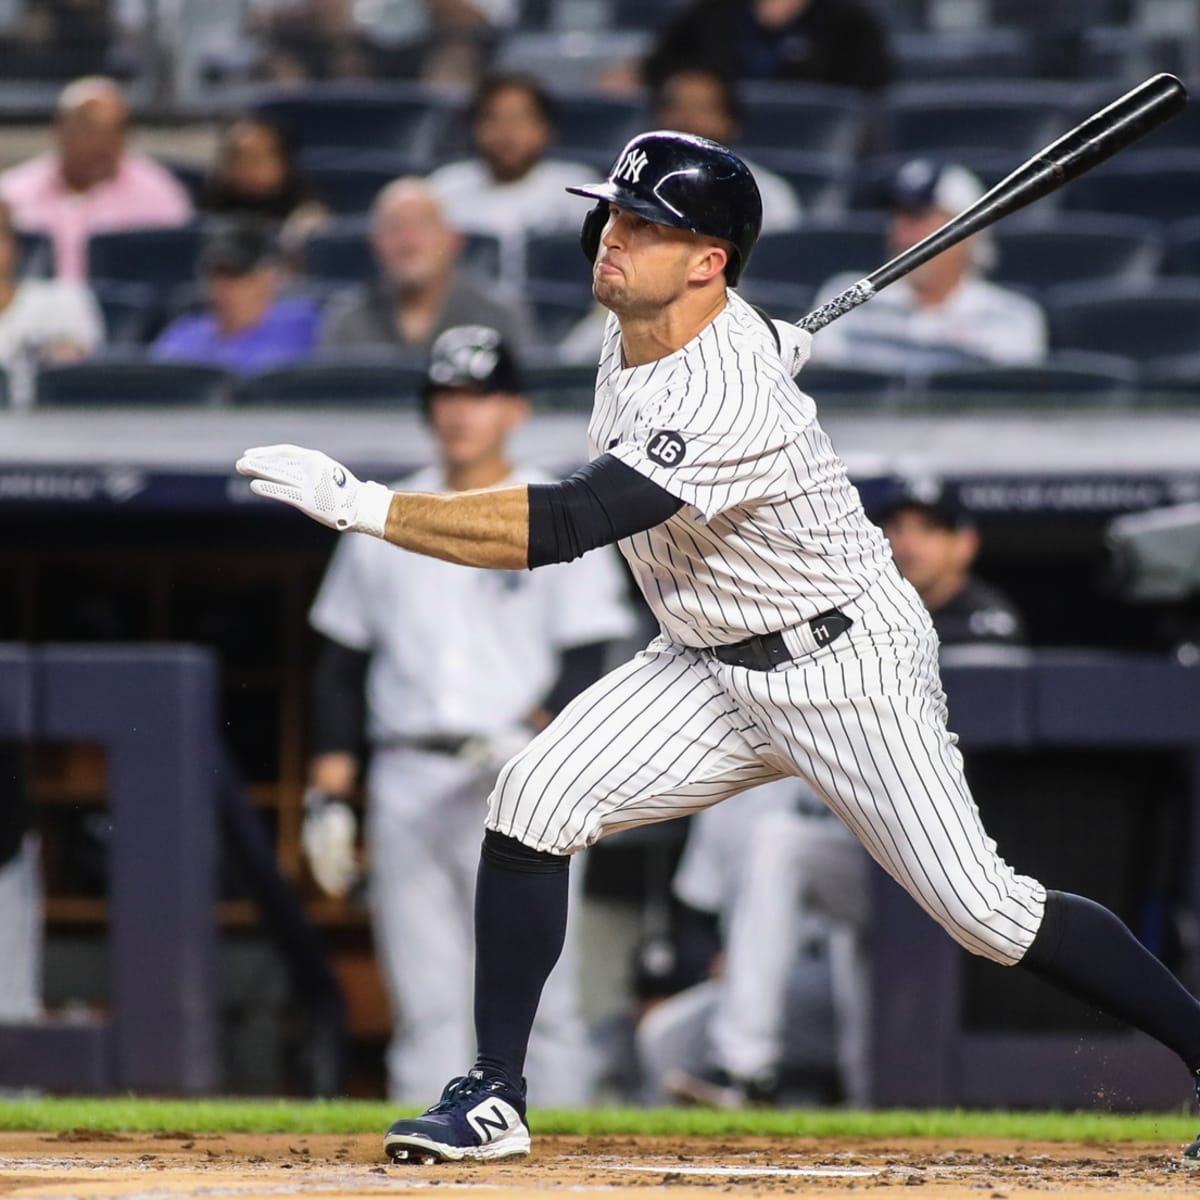 If Yankees want to re-sign Brett Gardner, here's what the deal